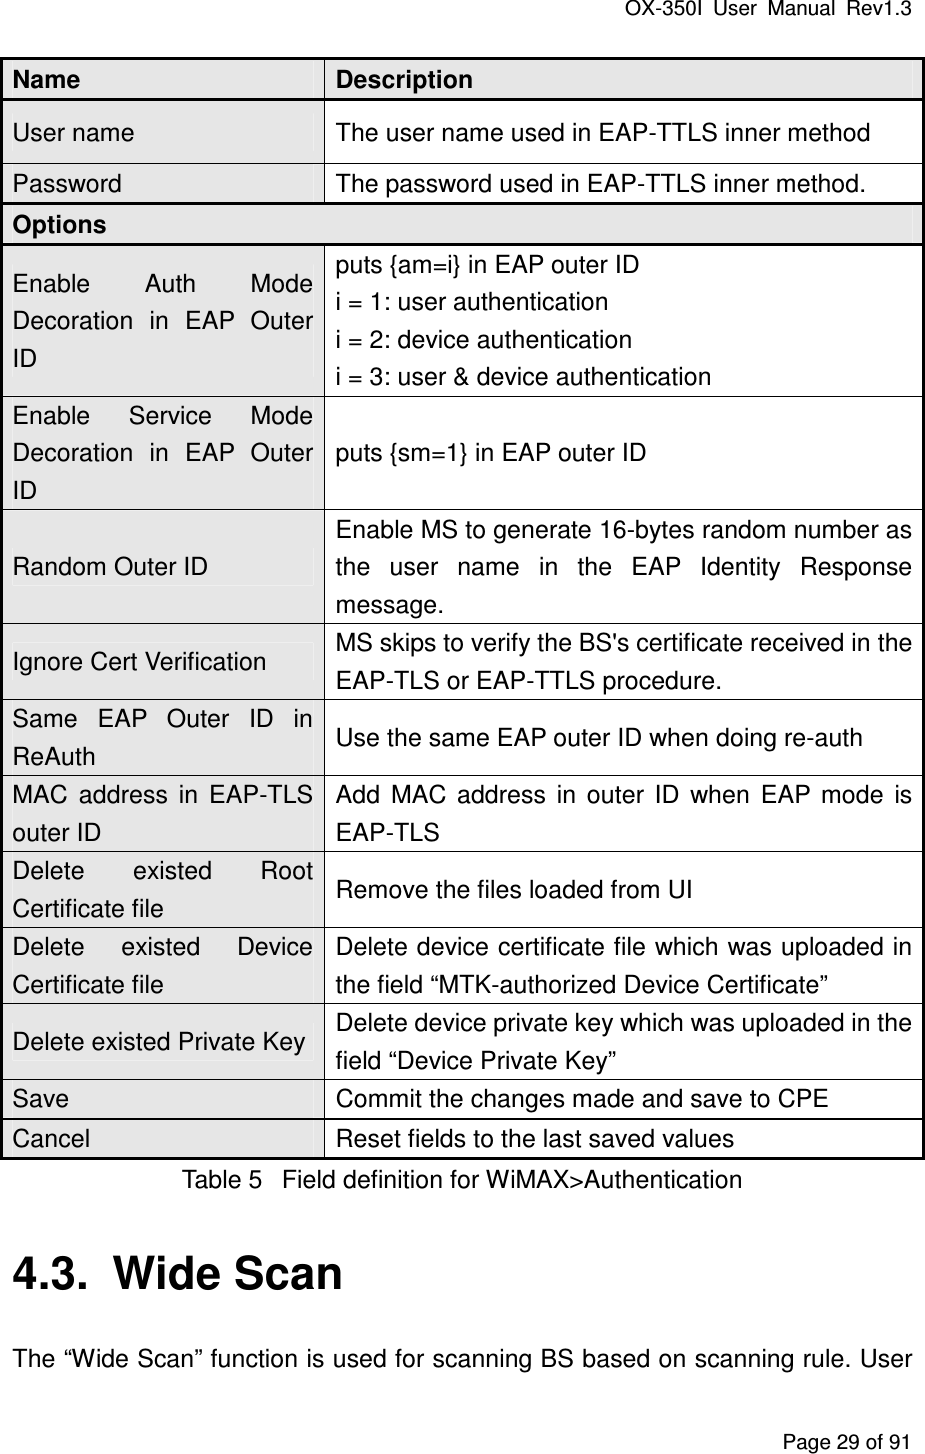 OX-350I  User  Manual  Rev1.3 Page 29 of 91 Name  Description User name  The user name used in EAP-TTLS inner method Password  The password used in EAP-TTLS inner method. Options Enable  Auth  Mode Decoration  in  EAP  Outer ID puts {am=i} in EAP outer ID i = 1: user authentication i = 2: device authentication i = 3: user &amp; device authentication Enable  Service  Mode Decoration  in  EAP  Outer ID puts {sm=1} in EAP outer ID Random Outer ID Enable MS to generate 16-bytes random number as the  user  name  in  the  EAP  Identity  Response message. Ignore Cert Verification  MS skips to verify the BS&apos;s certificate received in the EAP-TLS or EAP-TTLS procedure. Same  EAP  Outer  ID  in ReAuth  Use the same EAP outer ID when doing re-auth MAC  address  in  EAP-TLS outer ID Add  MAC  address  in  outer  ID  when  EAP  mode  is EAP-TLS Delete  existed  Root Certificate file  Remove the files loaded from UI Delete  existed  Device Certificate file Delete device certificate file which was uploaded in the field “MTK-authorized Device Certificate” Delete existed Private Key Delete device private key which was uploaded in the field “Device Private Key” Save  Commit the changes made and save to CPE Cancel  Reset fields to the last saved values Table 5  Field definition for WiMAX&gt;Authentication 4.3.  Wide Scan The “Wide Scan” function is used for scanning BS based on scanning rule. User 